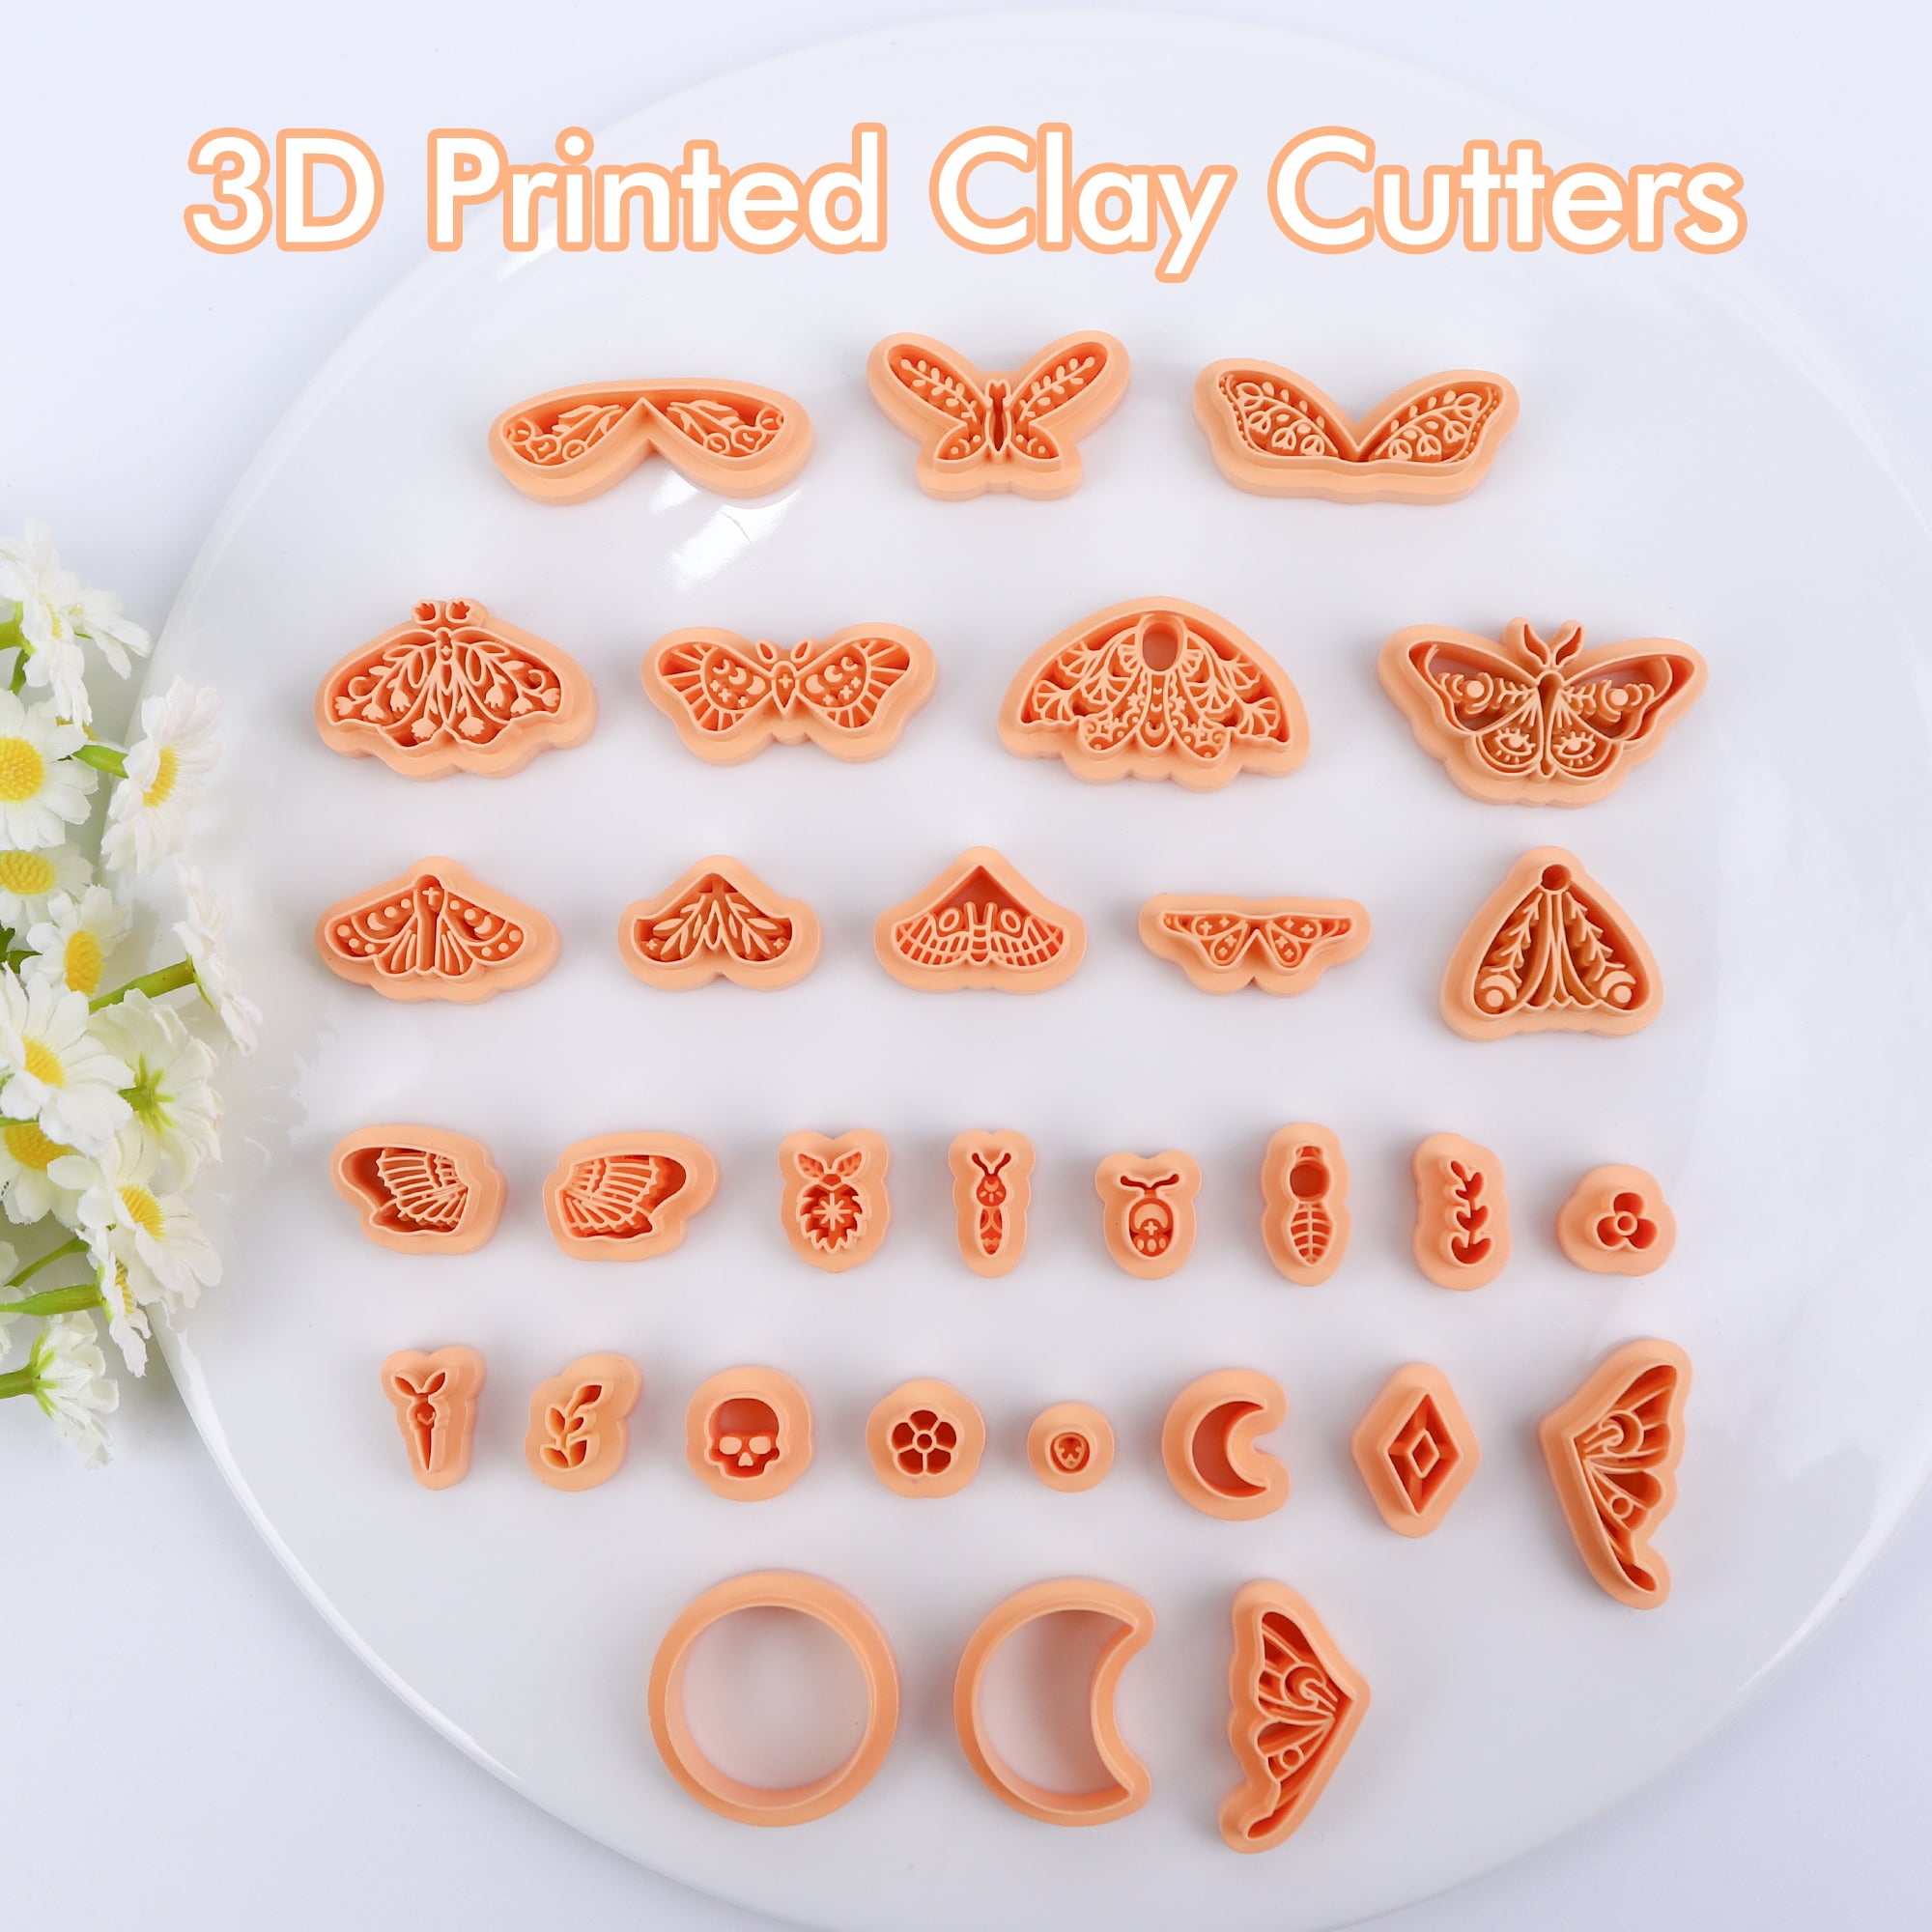 Puocaon Moth Polymer Clay Cutters 31 Pcs